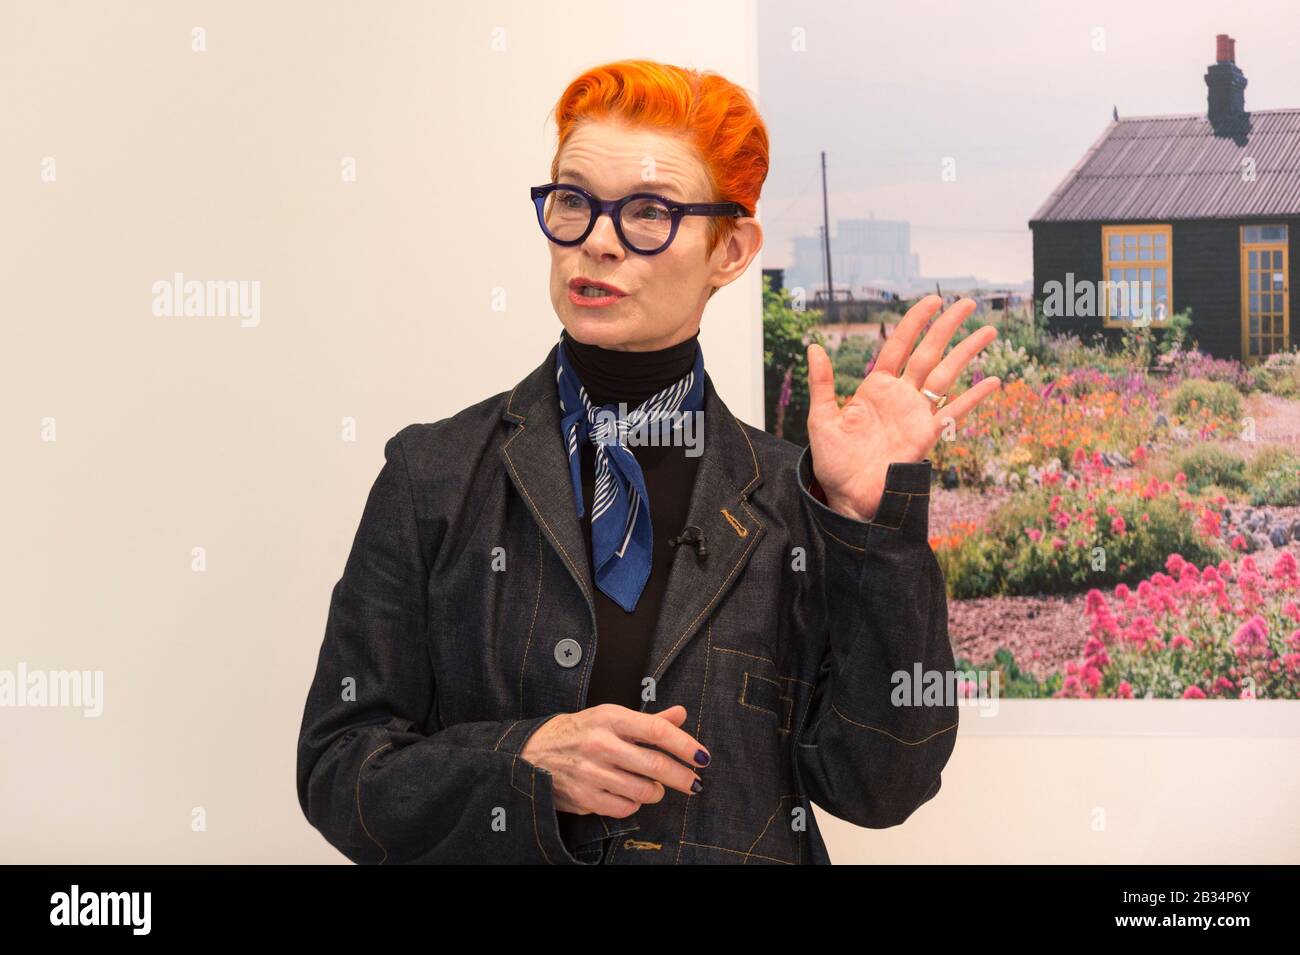 London, UK.  4 March 2020. Academy-Award winning costume designer Sandy Powell at the presentation of her suit ahead of being offered for auction at Phillips, Berkeley Square.  Worn by Powell at the 2020 BAFTAs and Oscars, the cream calico toile suit includes autographs from over 100 movie stars.   Proceeds will go towards Art Fund's public appeal to save and protect Prospect Cottage in Dungeness, Kent, home of filmmaker Derek Jarman.  The online auction runs 4 to 11 March 2020. Credit: Stephen Chung/Alamy Live News Stock Photo